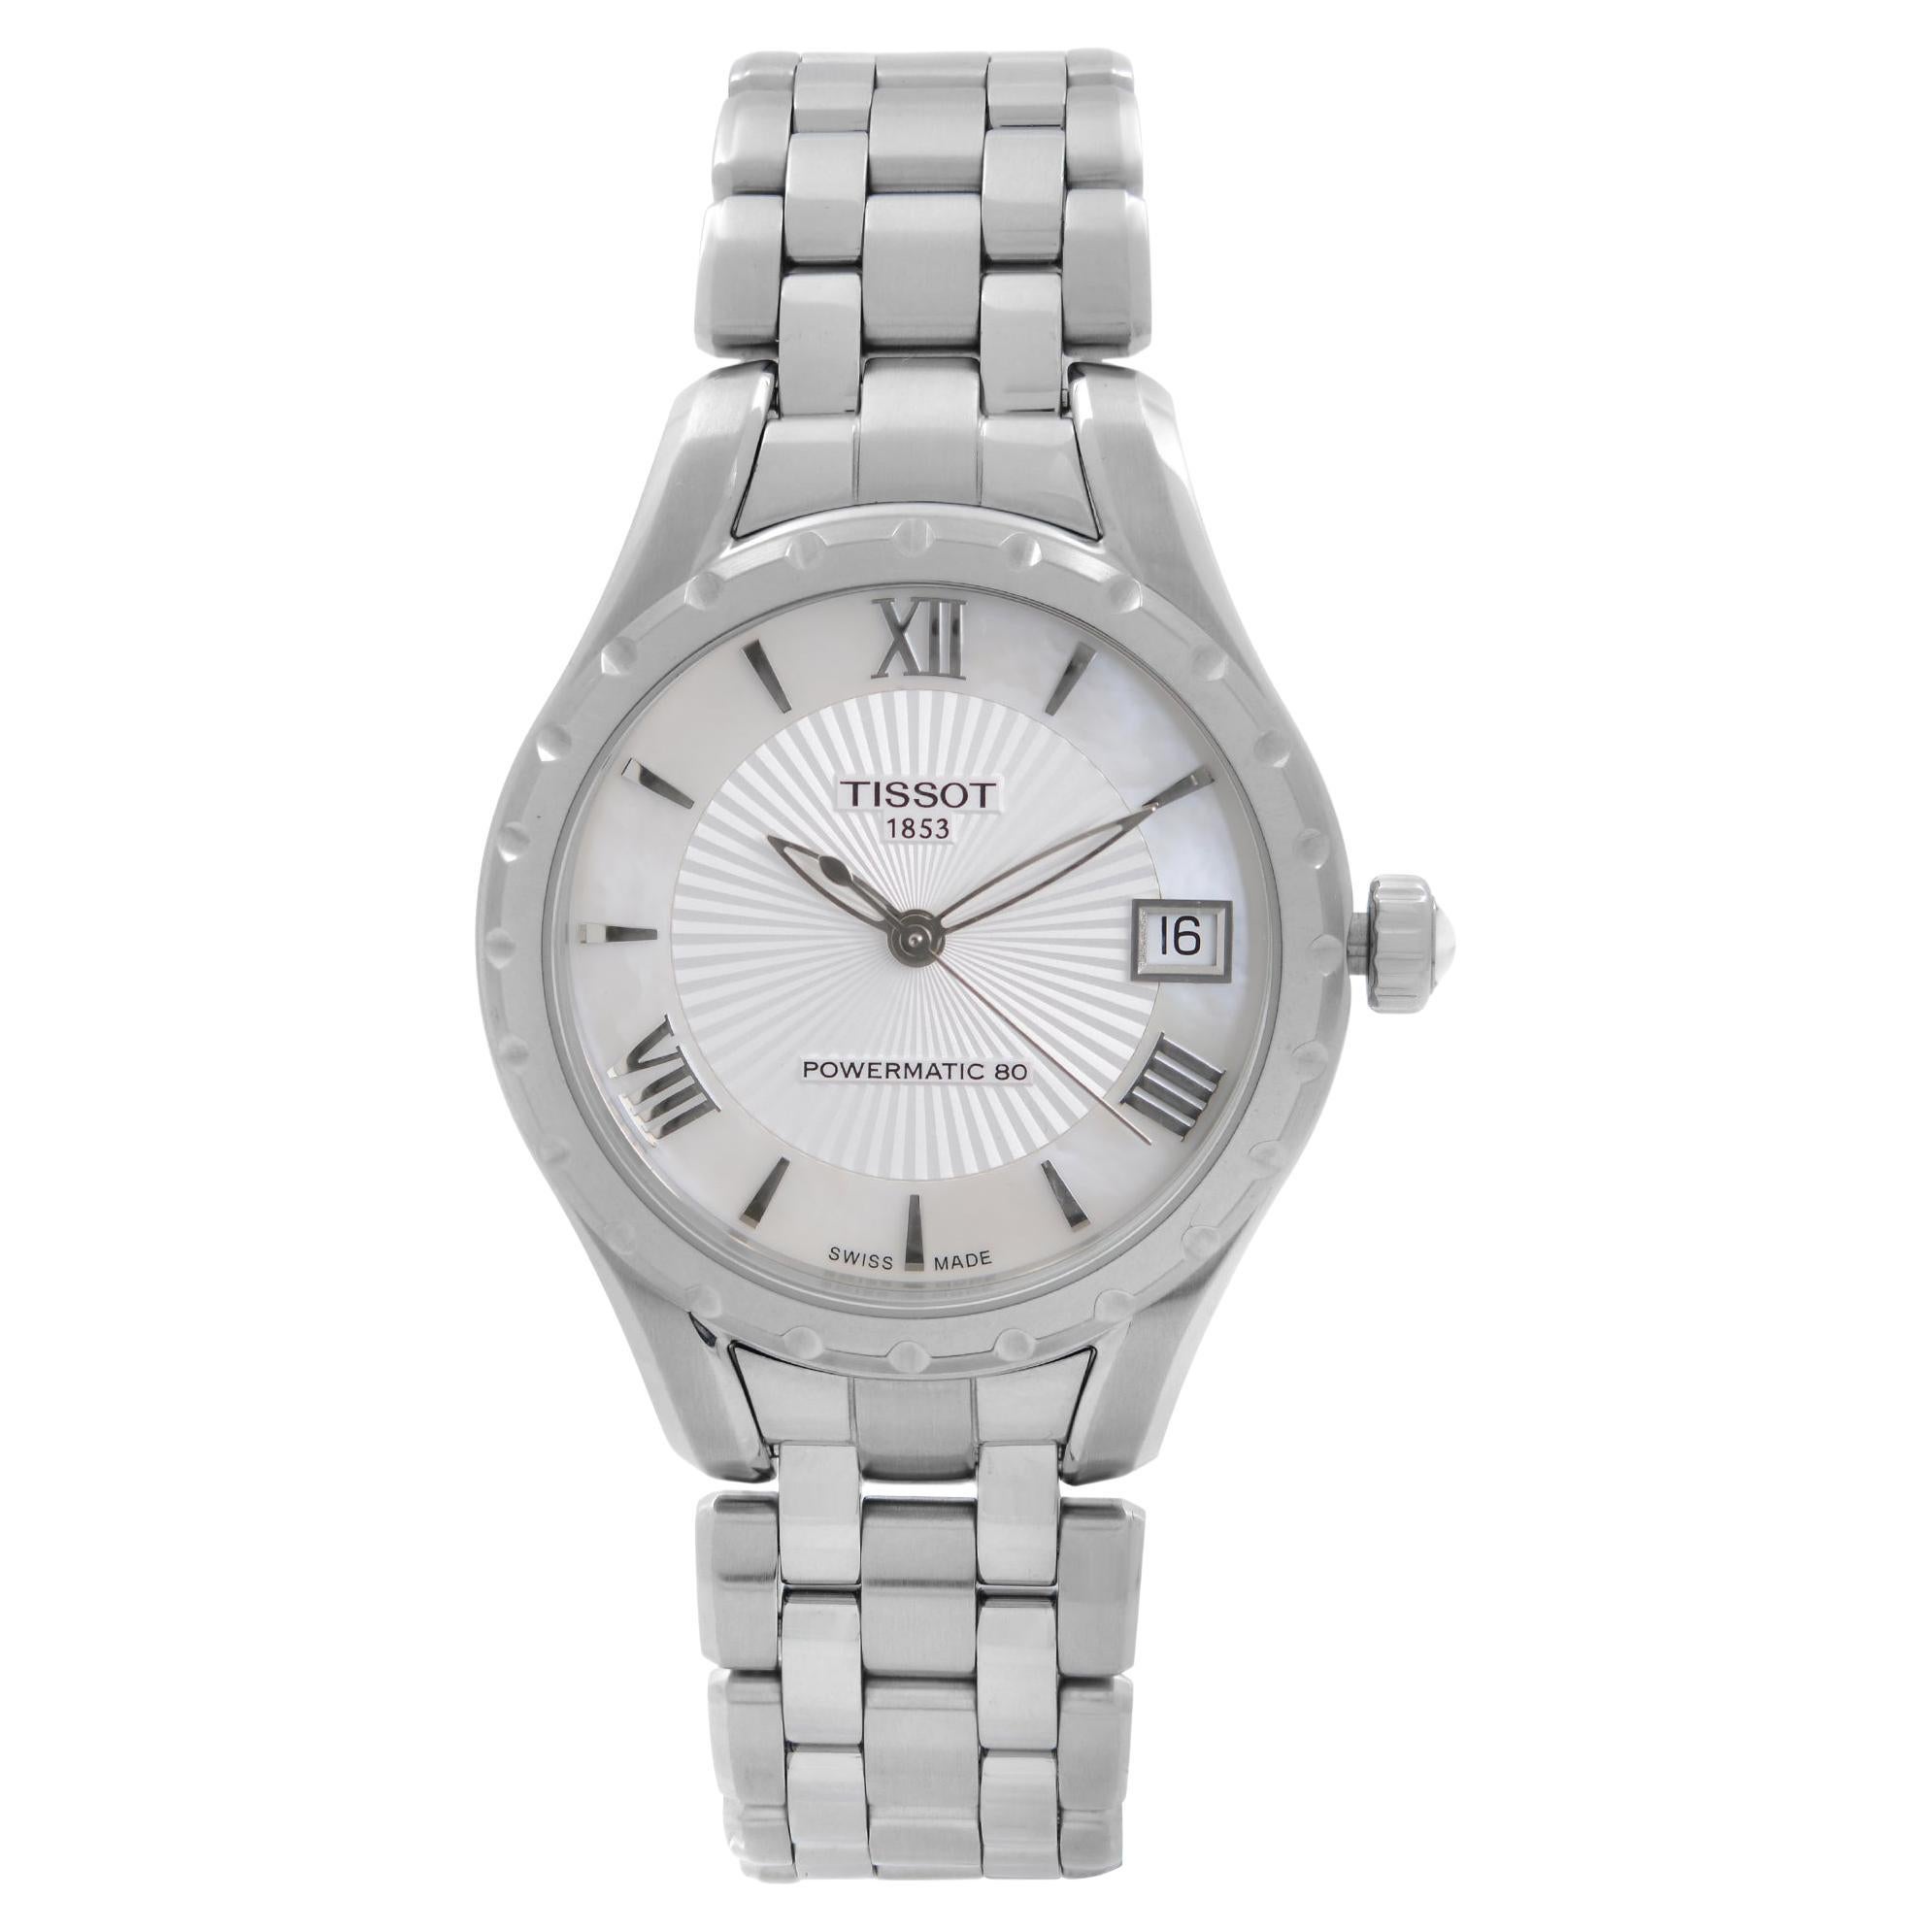 Tissot Lady 80 Steel White MOP Dial Automatic Ladies Watch T072.207.11.118.00 For Sale